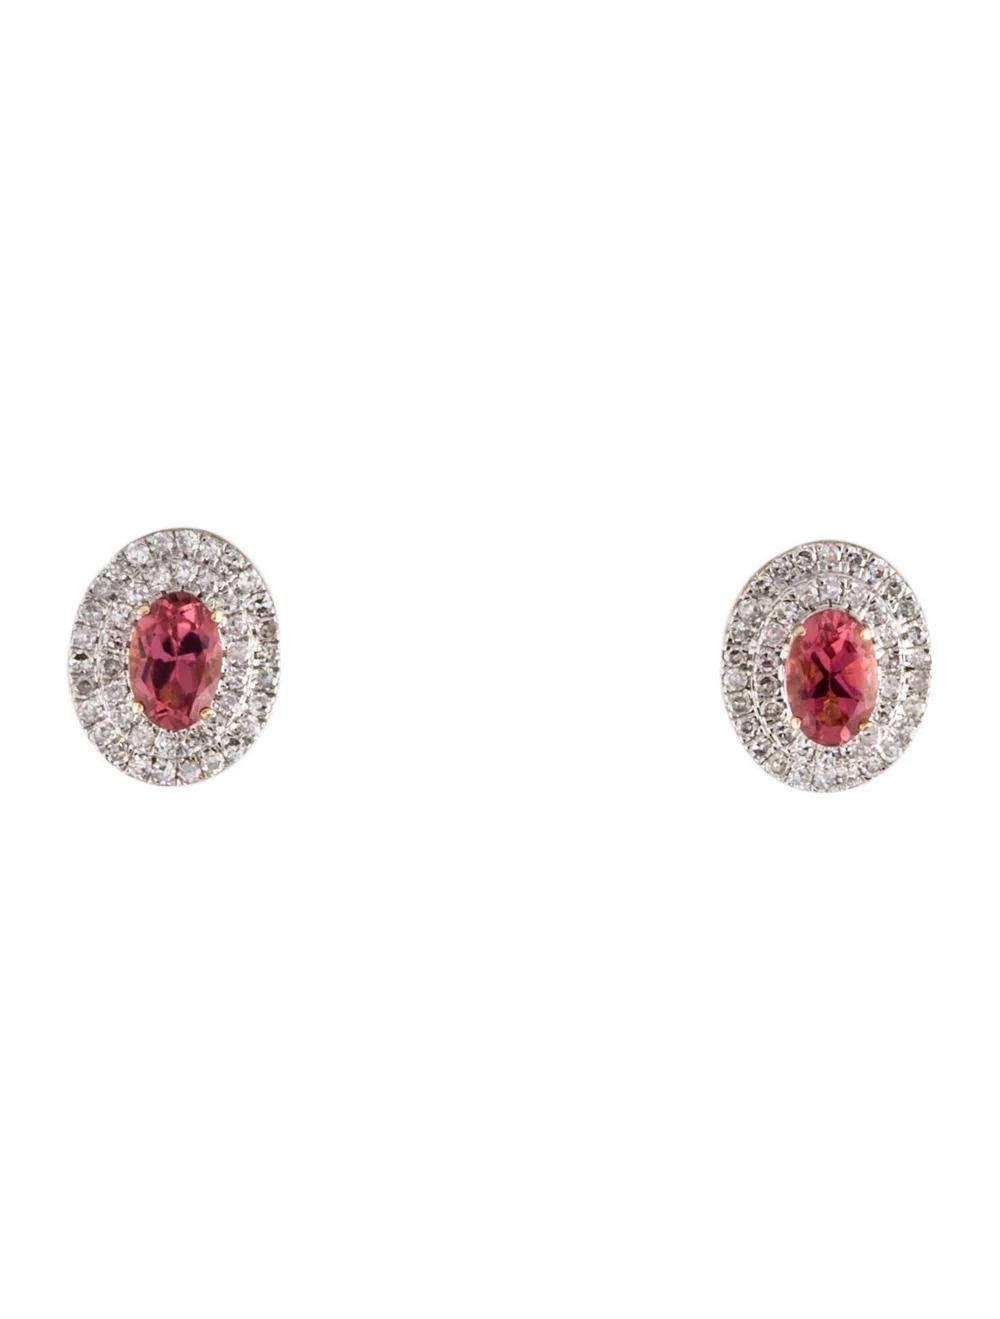 This exquisite 14K Yellow Gold stud earrings feature a stunning Oval Modified Brilliant Tourmaline gemstone, accentuated by shimmering Diamonds. Crafted to perfection, these earrings are both elegant and timeless, adding a touch of sophistication to